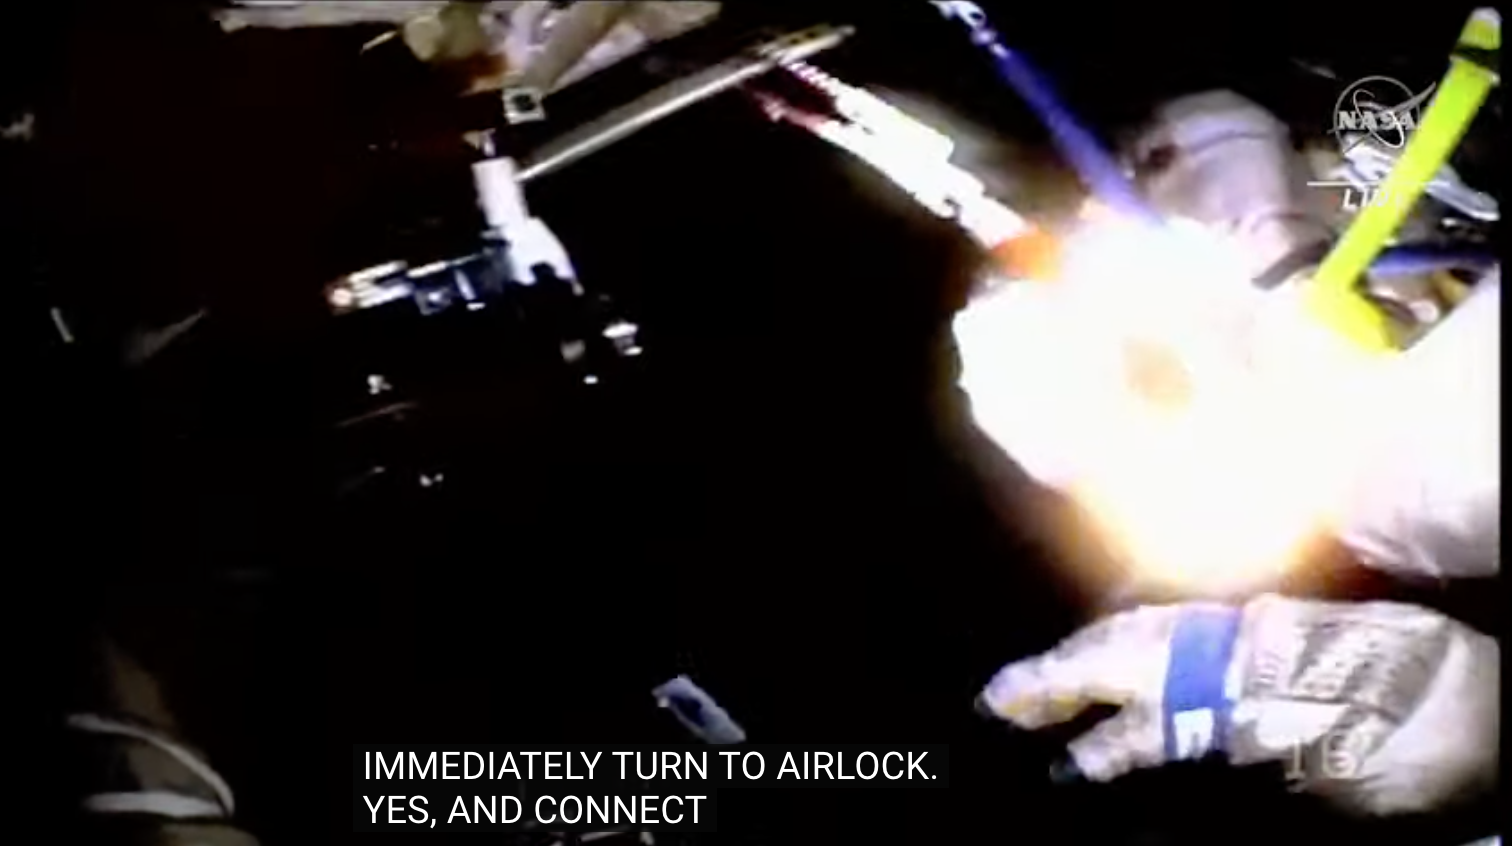 Cosmonaut Oleg Artemyev was ordered to return to the airlock immediately and connect to station power. (Screenshot: NASA TV)